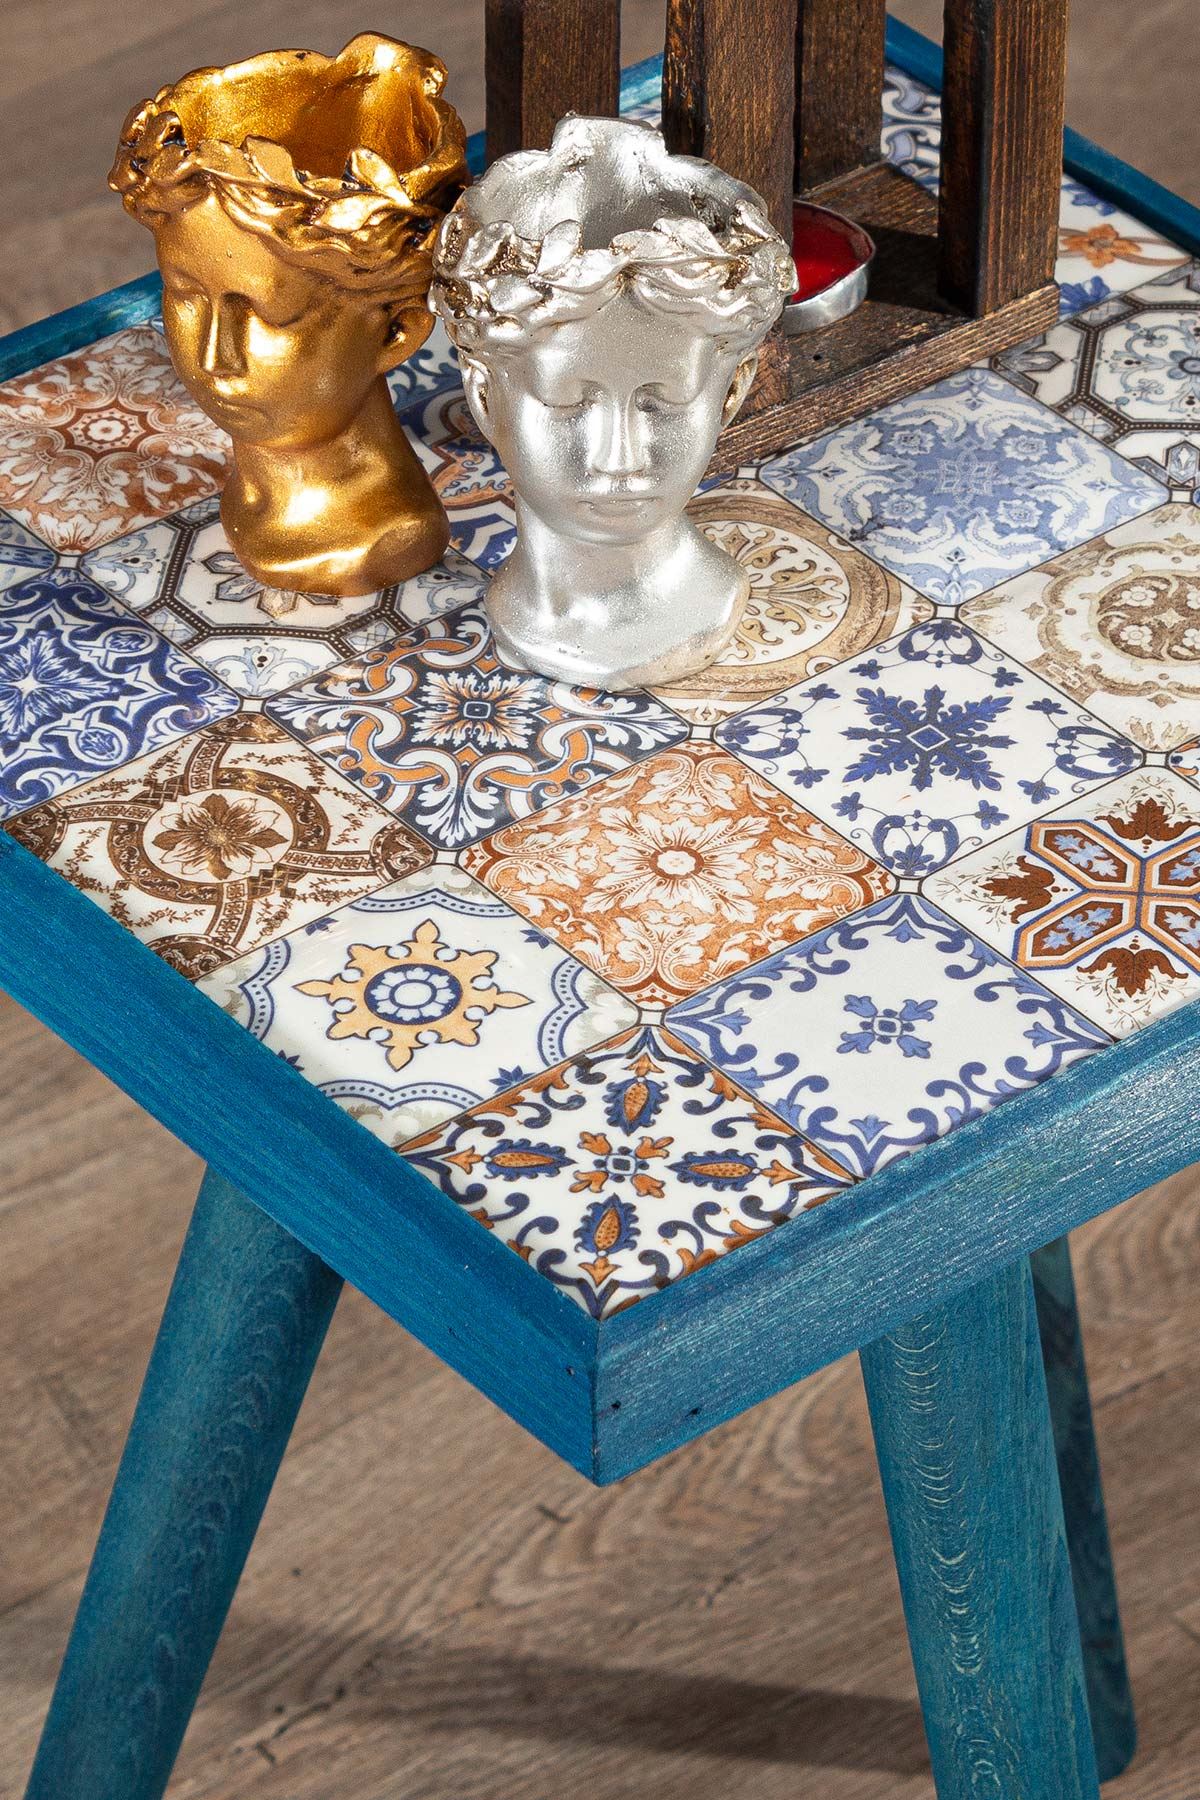 Bofigo Wooden Tile Center Table Wooden Solid Wood Table 32x32 Cm Blue